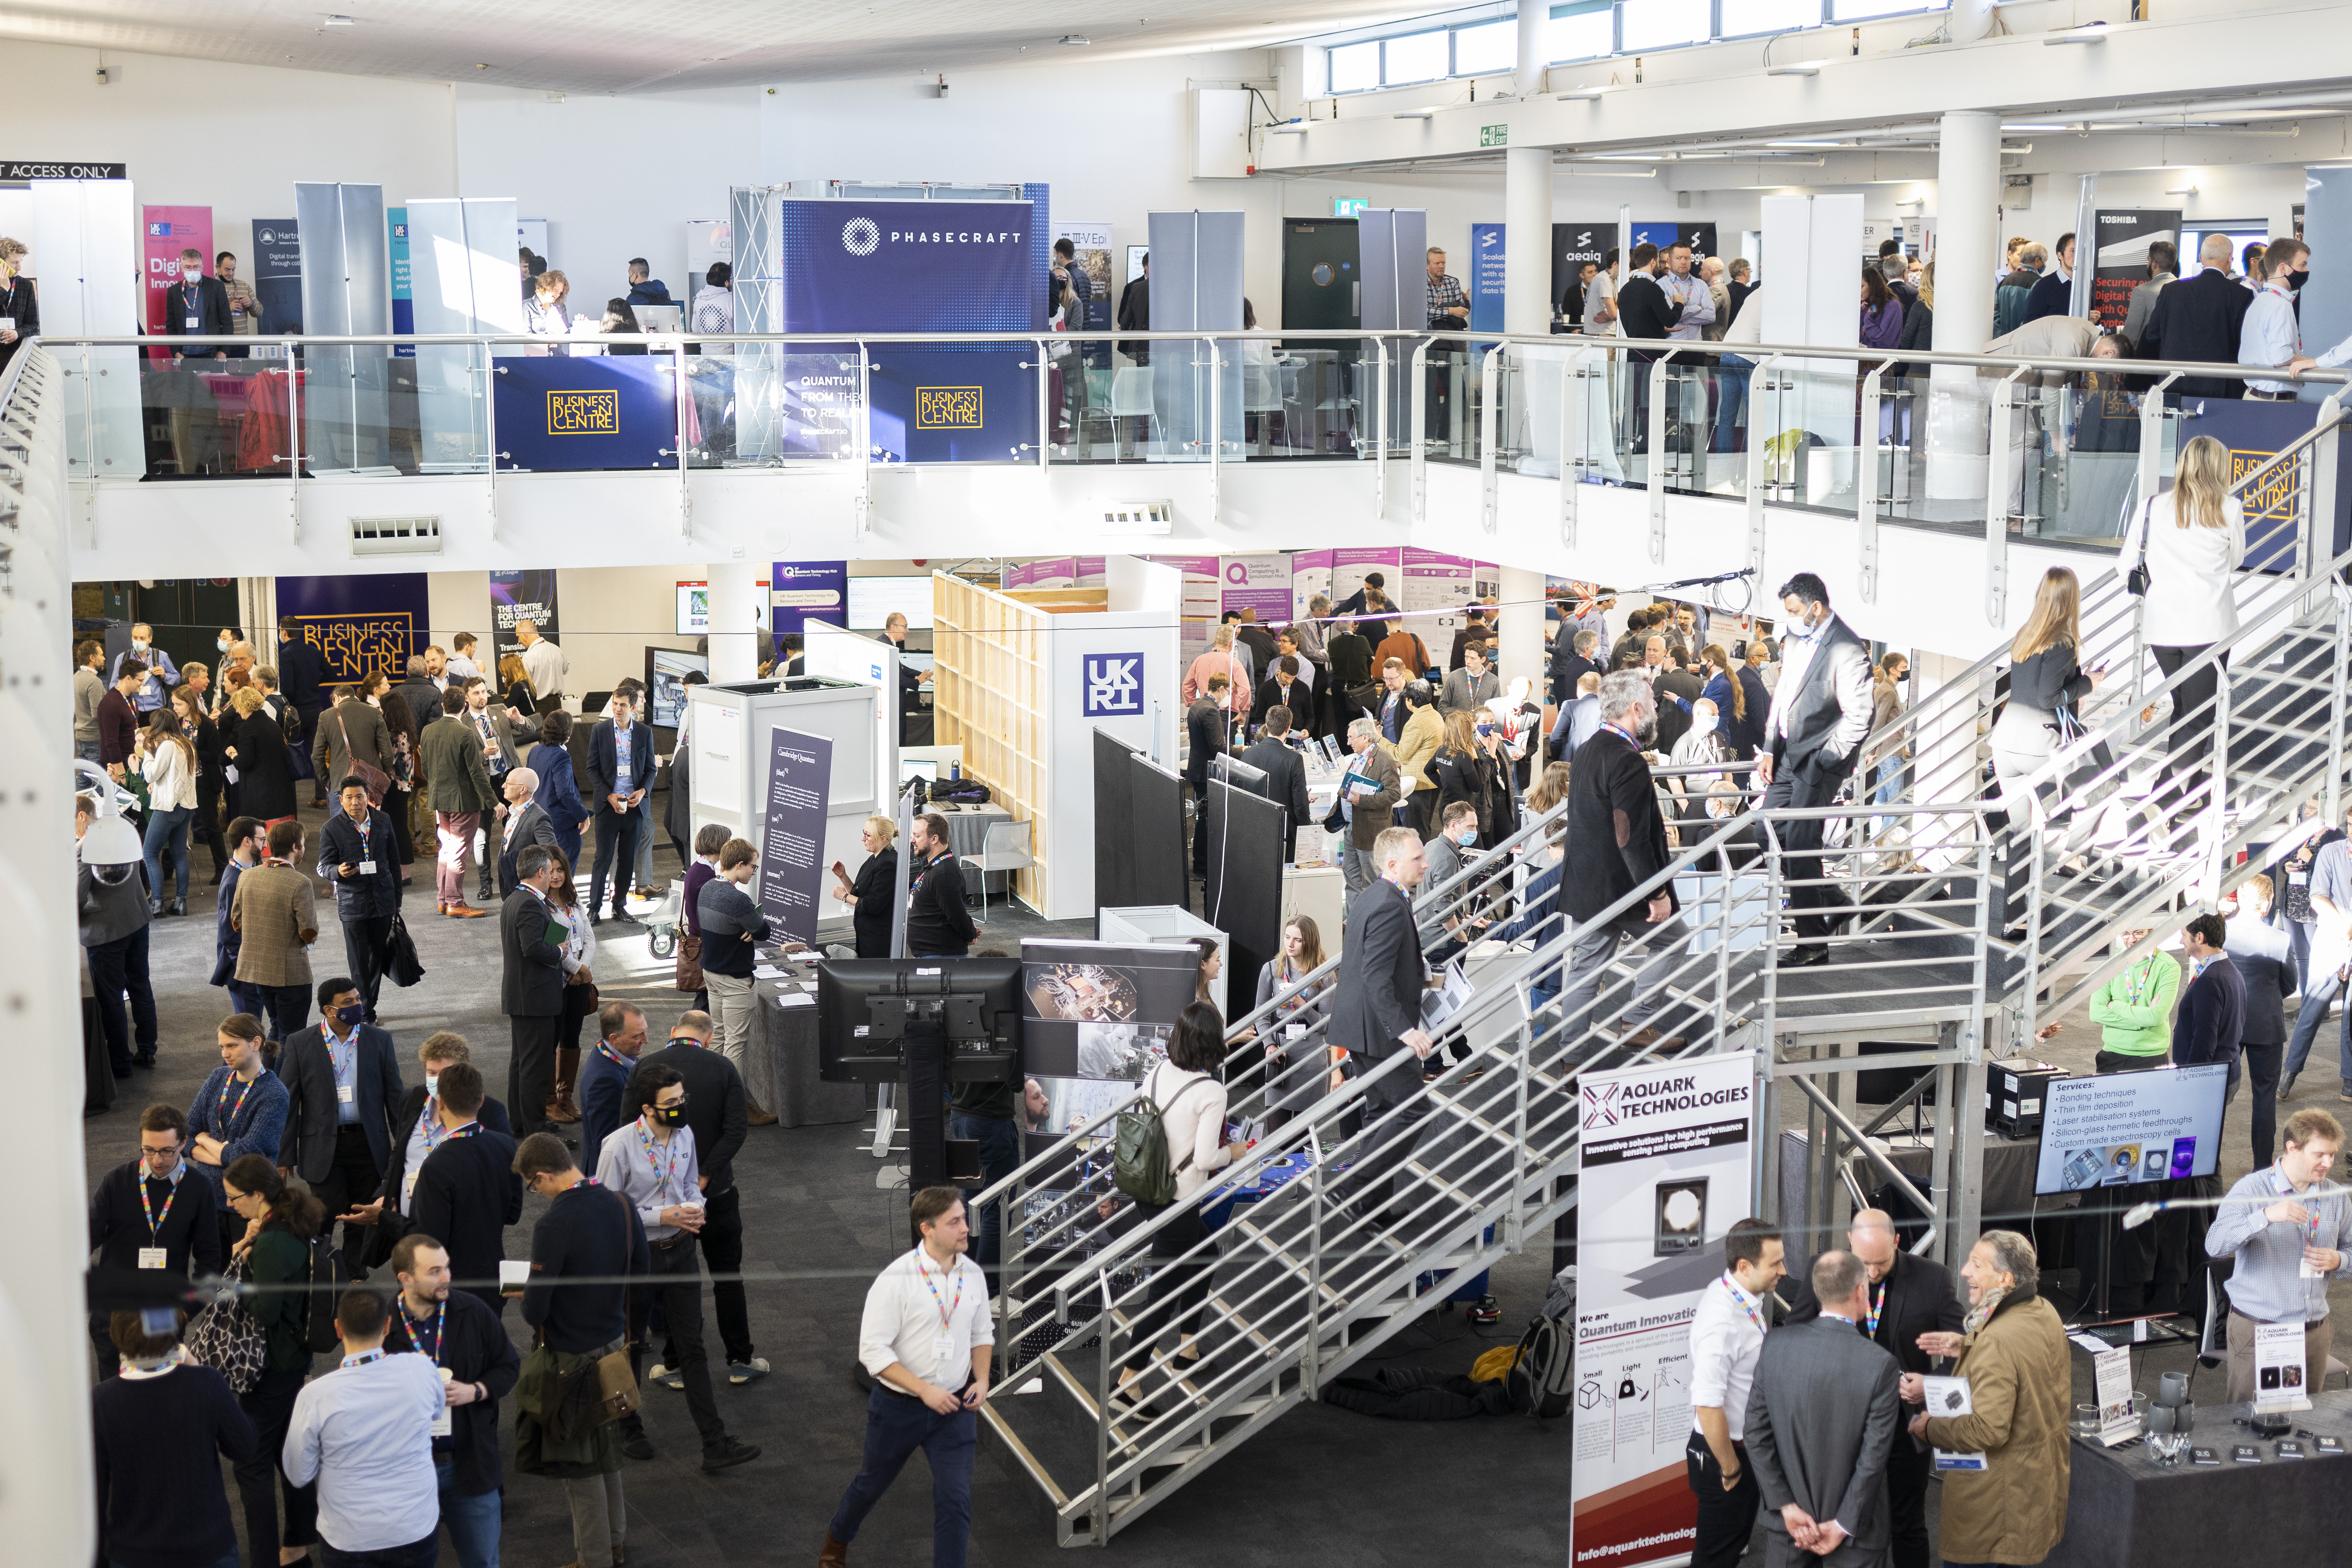 “Quantum pioneers” show their innovative solutions at technology showcase